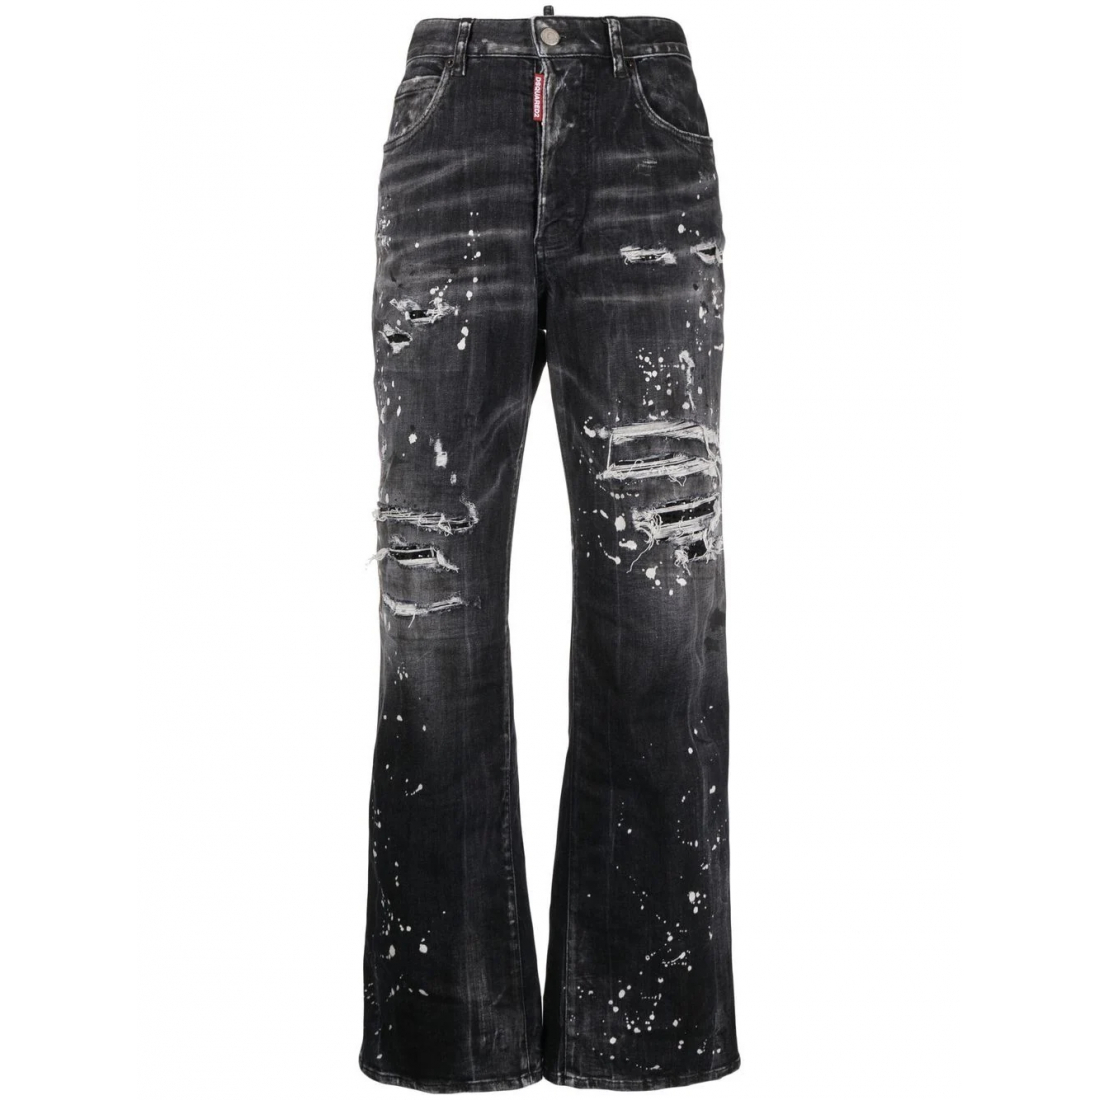 Women's 'Distressed' Jeans